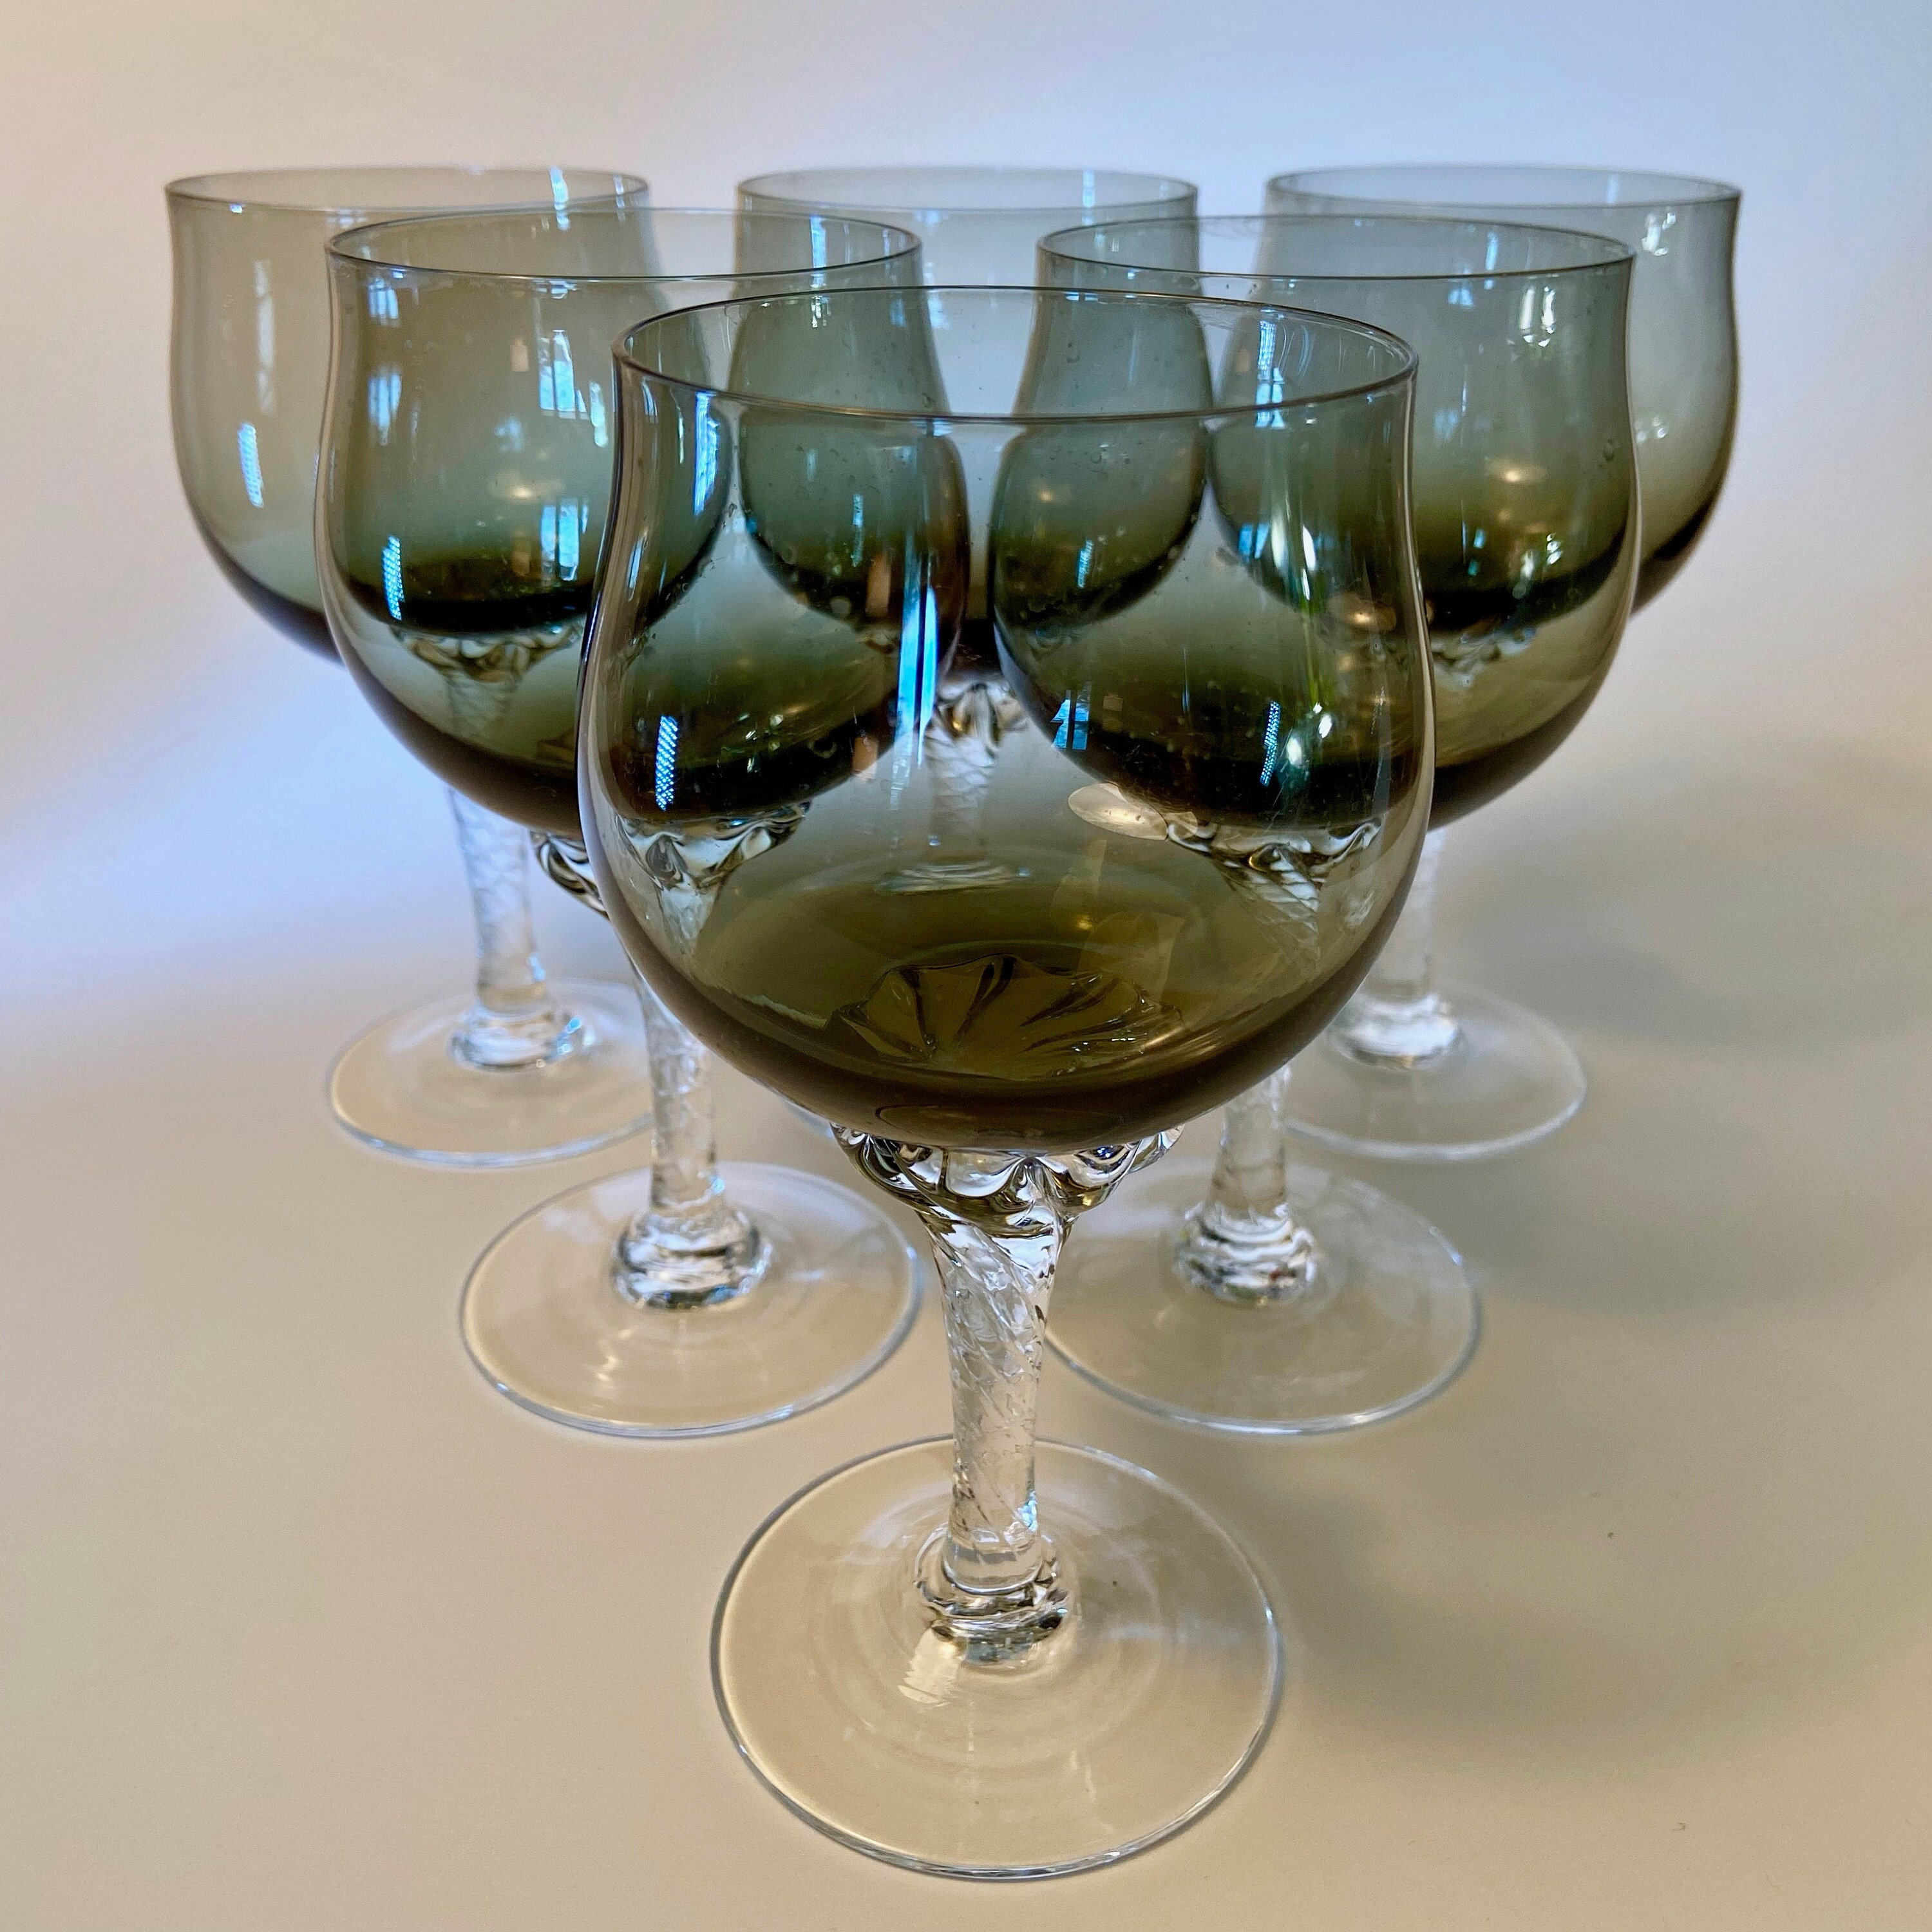 All Little Cute Things - Skeleton Stem Wine Glass – Ivy on Main